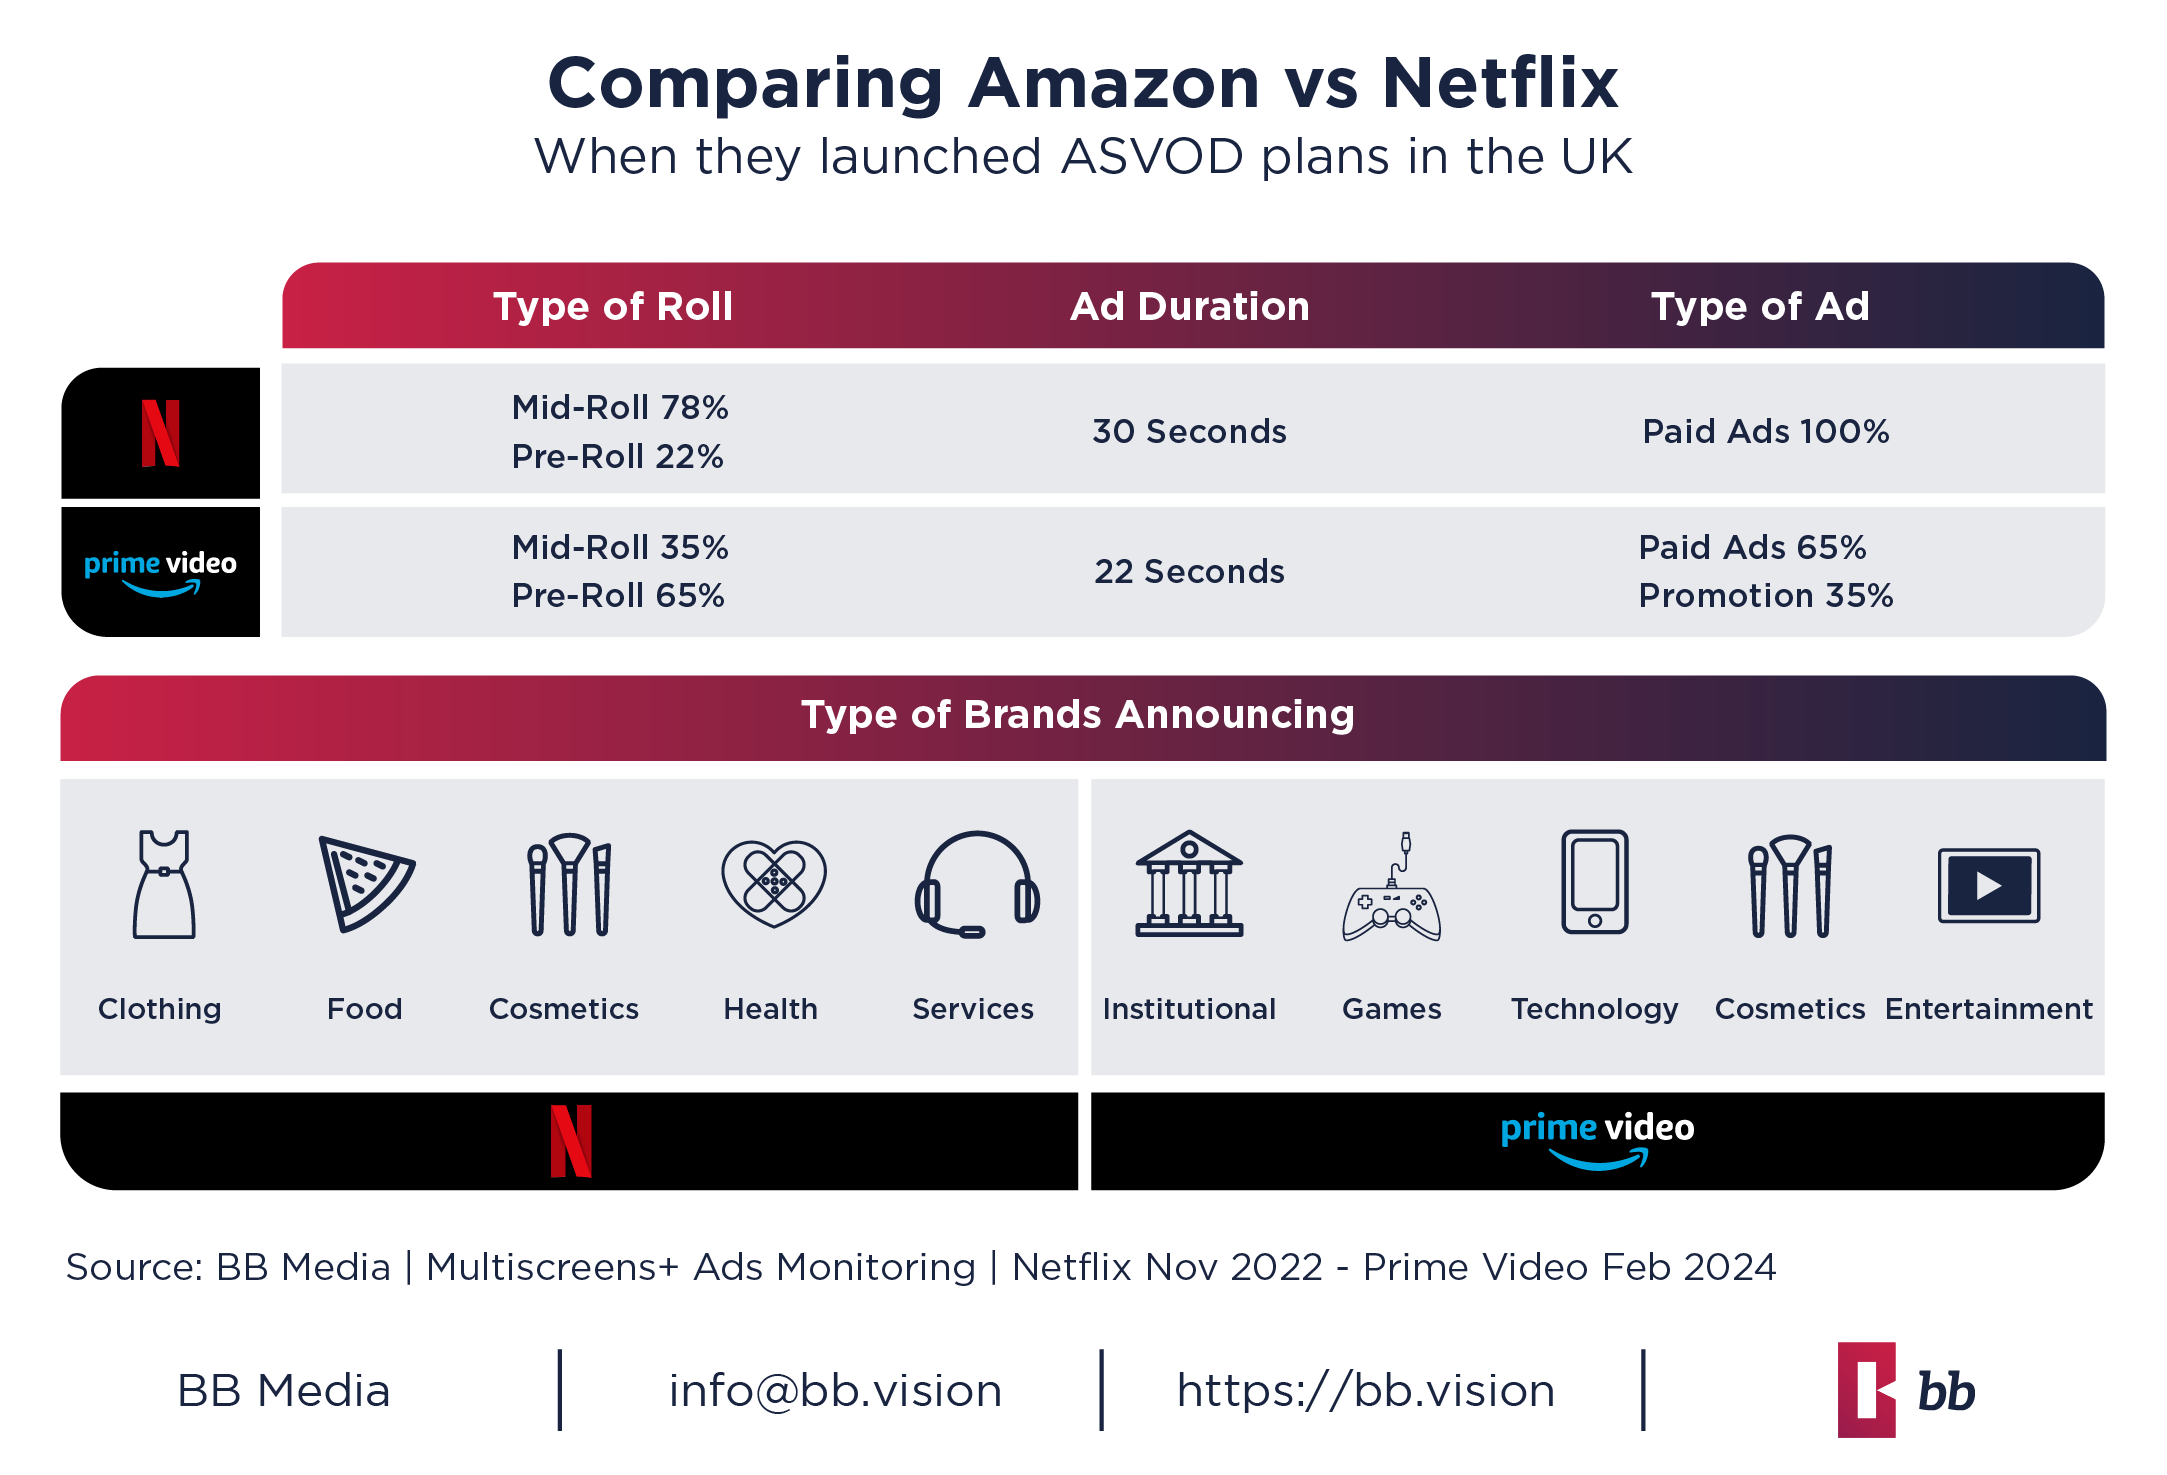 Table comparing Netflix and Prime Video's plans with ads